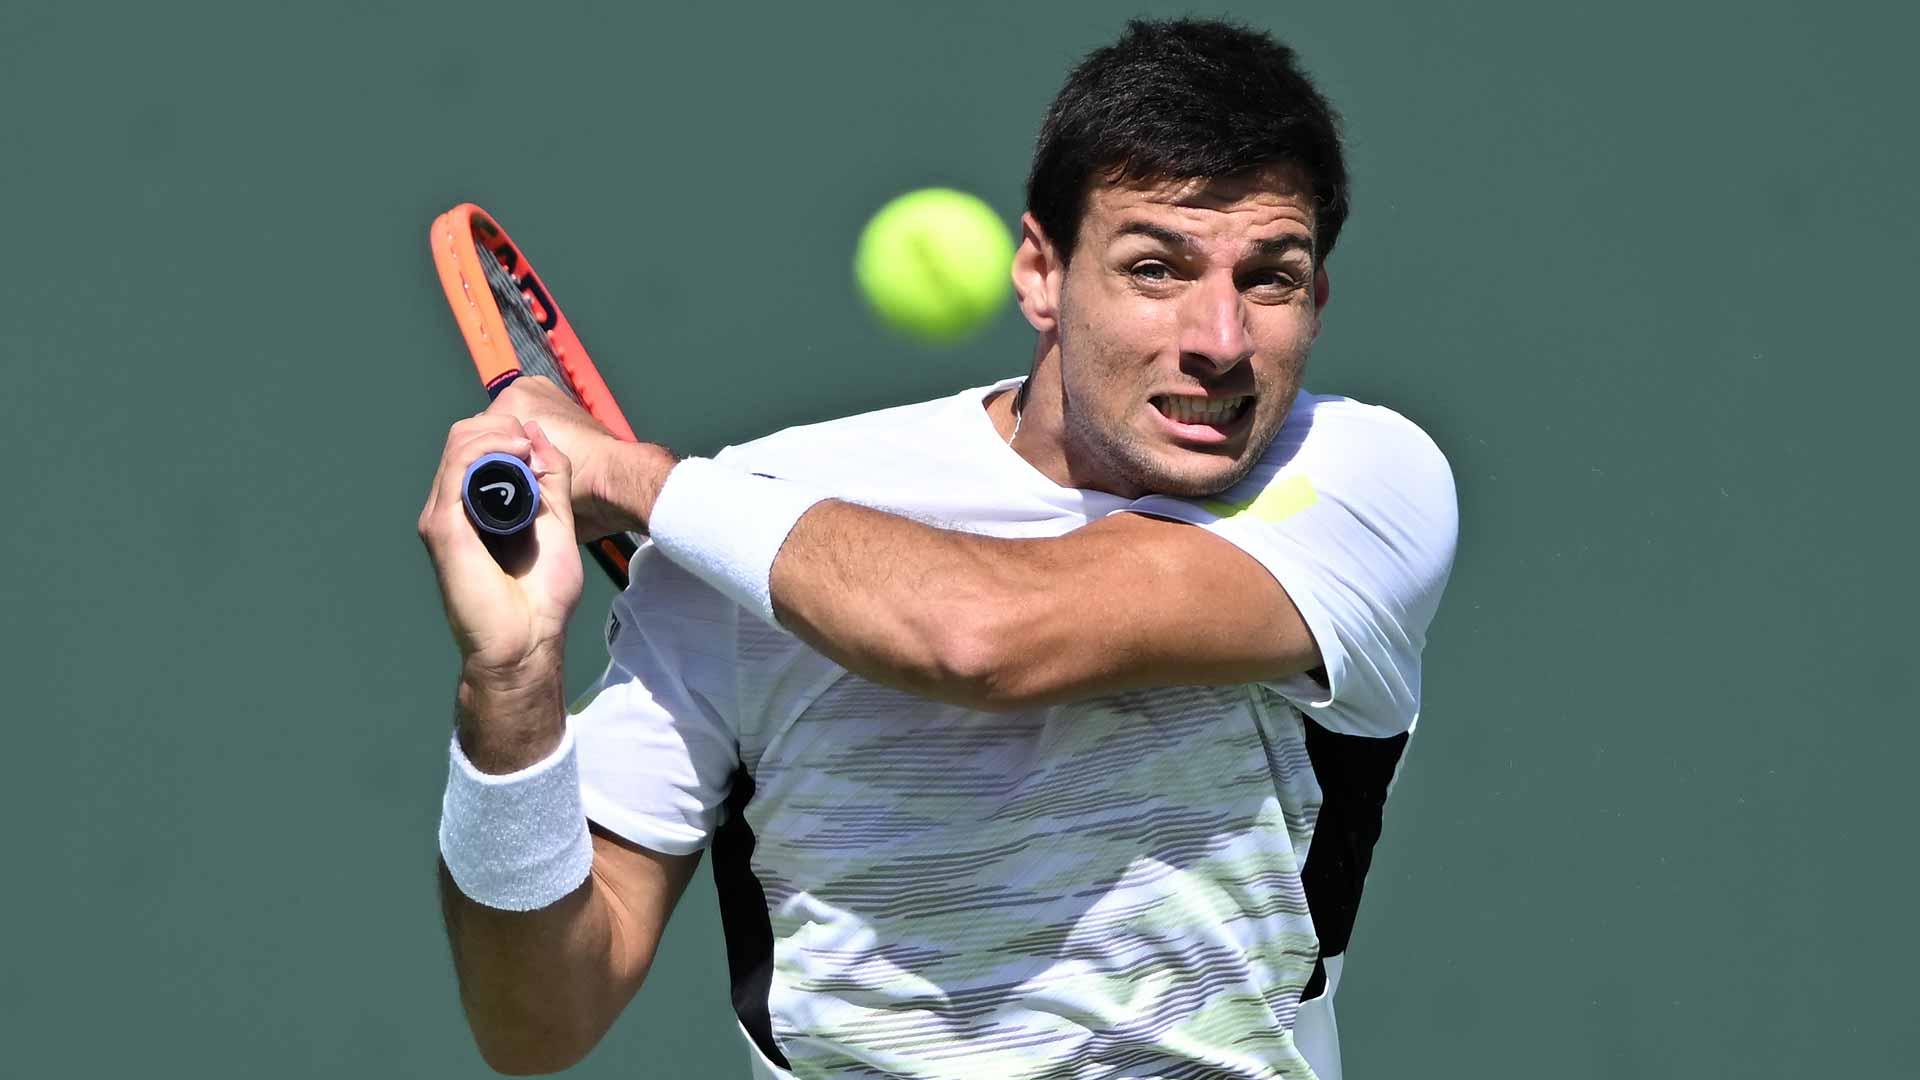 Bernabe Zapata Miralles will try to earn his first Top 10 win against Novak Djokovic on Wednesday.